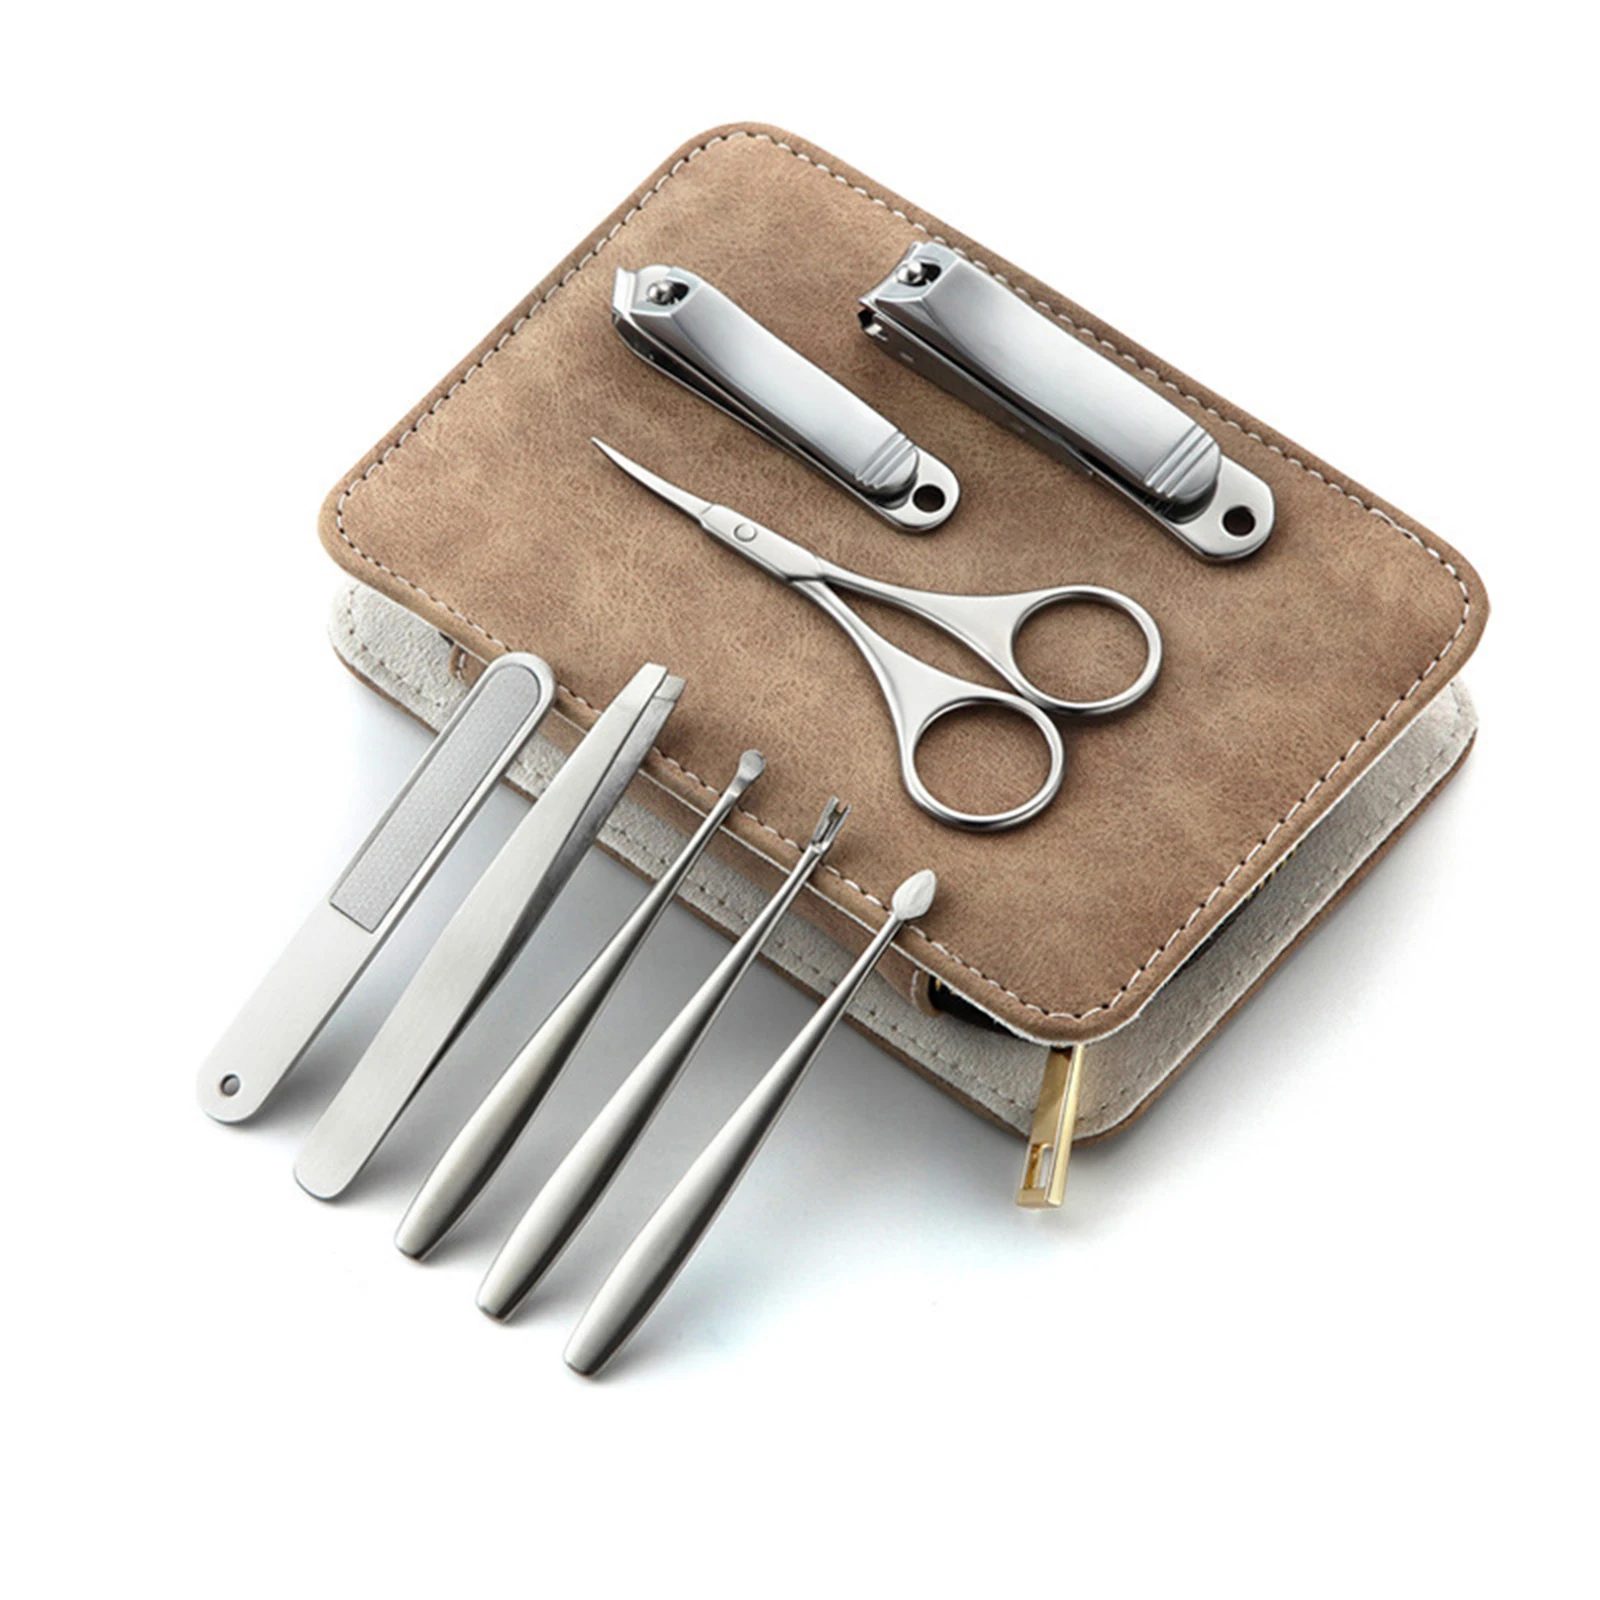 Professional 8-Pack Manicure Set Pedicure Sets Nail Cutter Tools Grooming Set for Nail Care Men Women Daily Use Stainless Steel